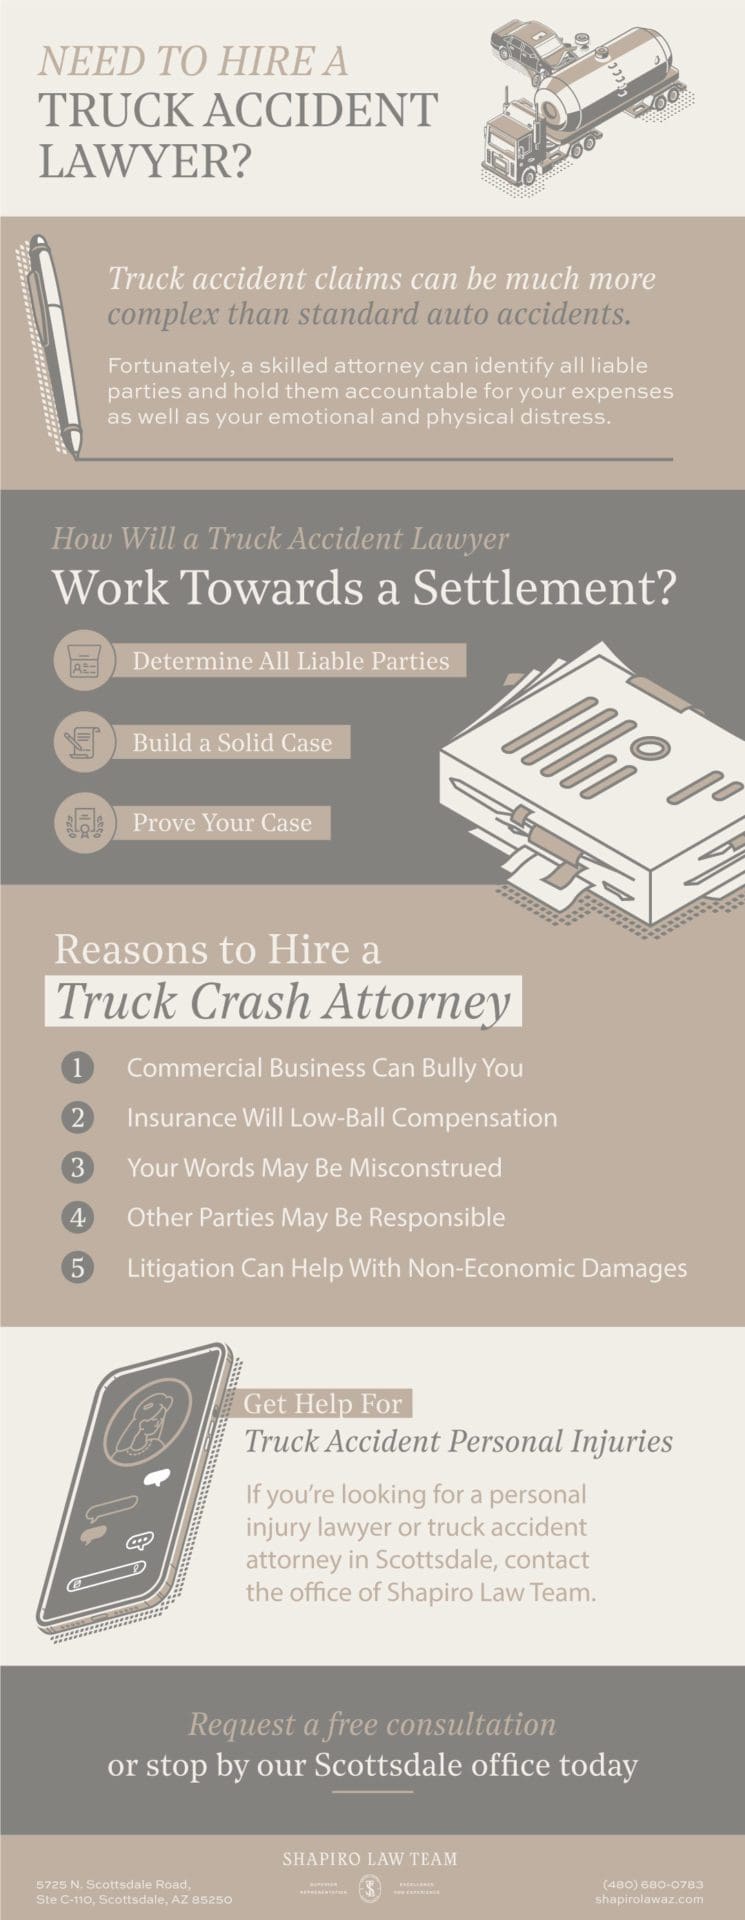 NEED-TO-HIRE-A-TRUCK-ACCIDENT-LAWYER